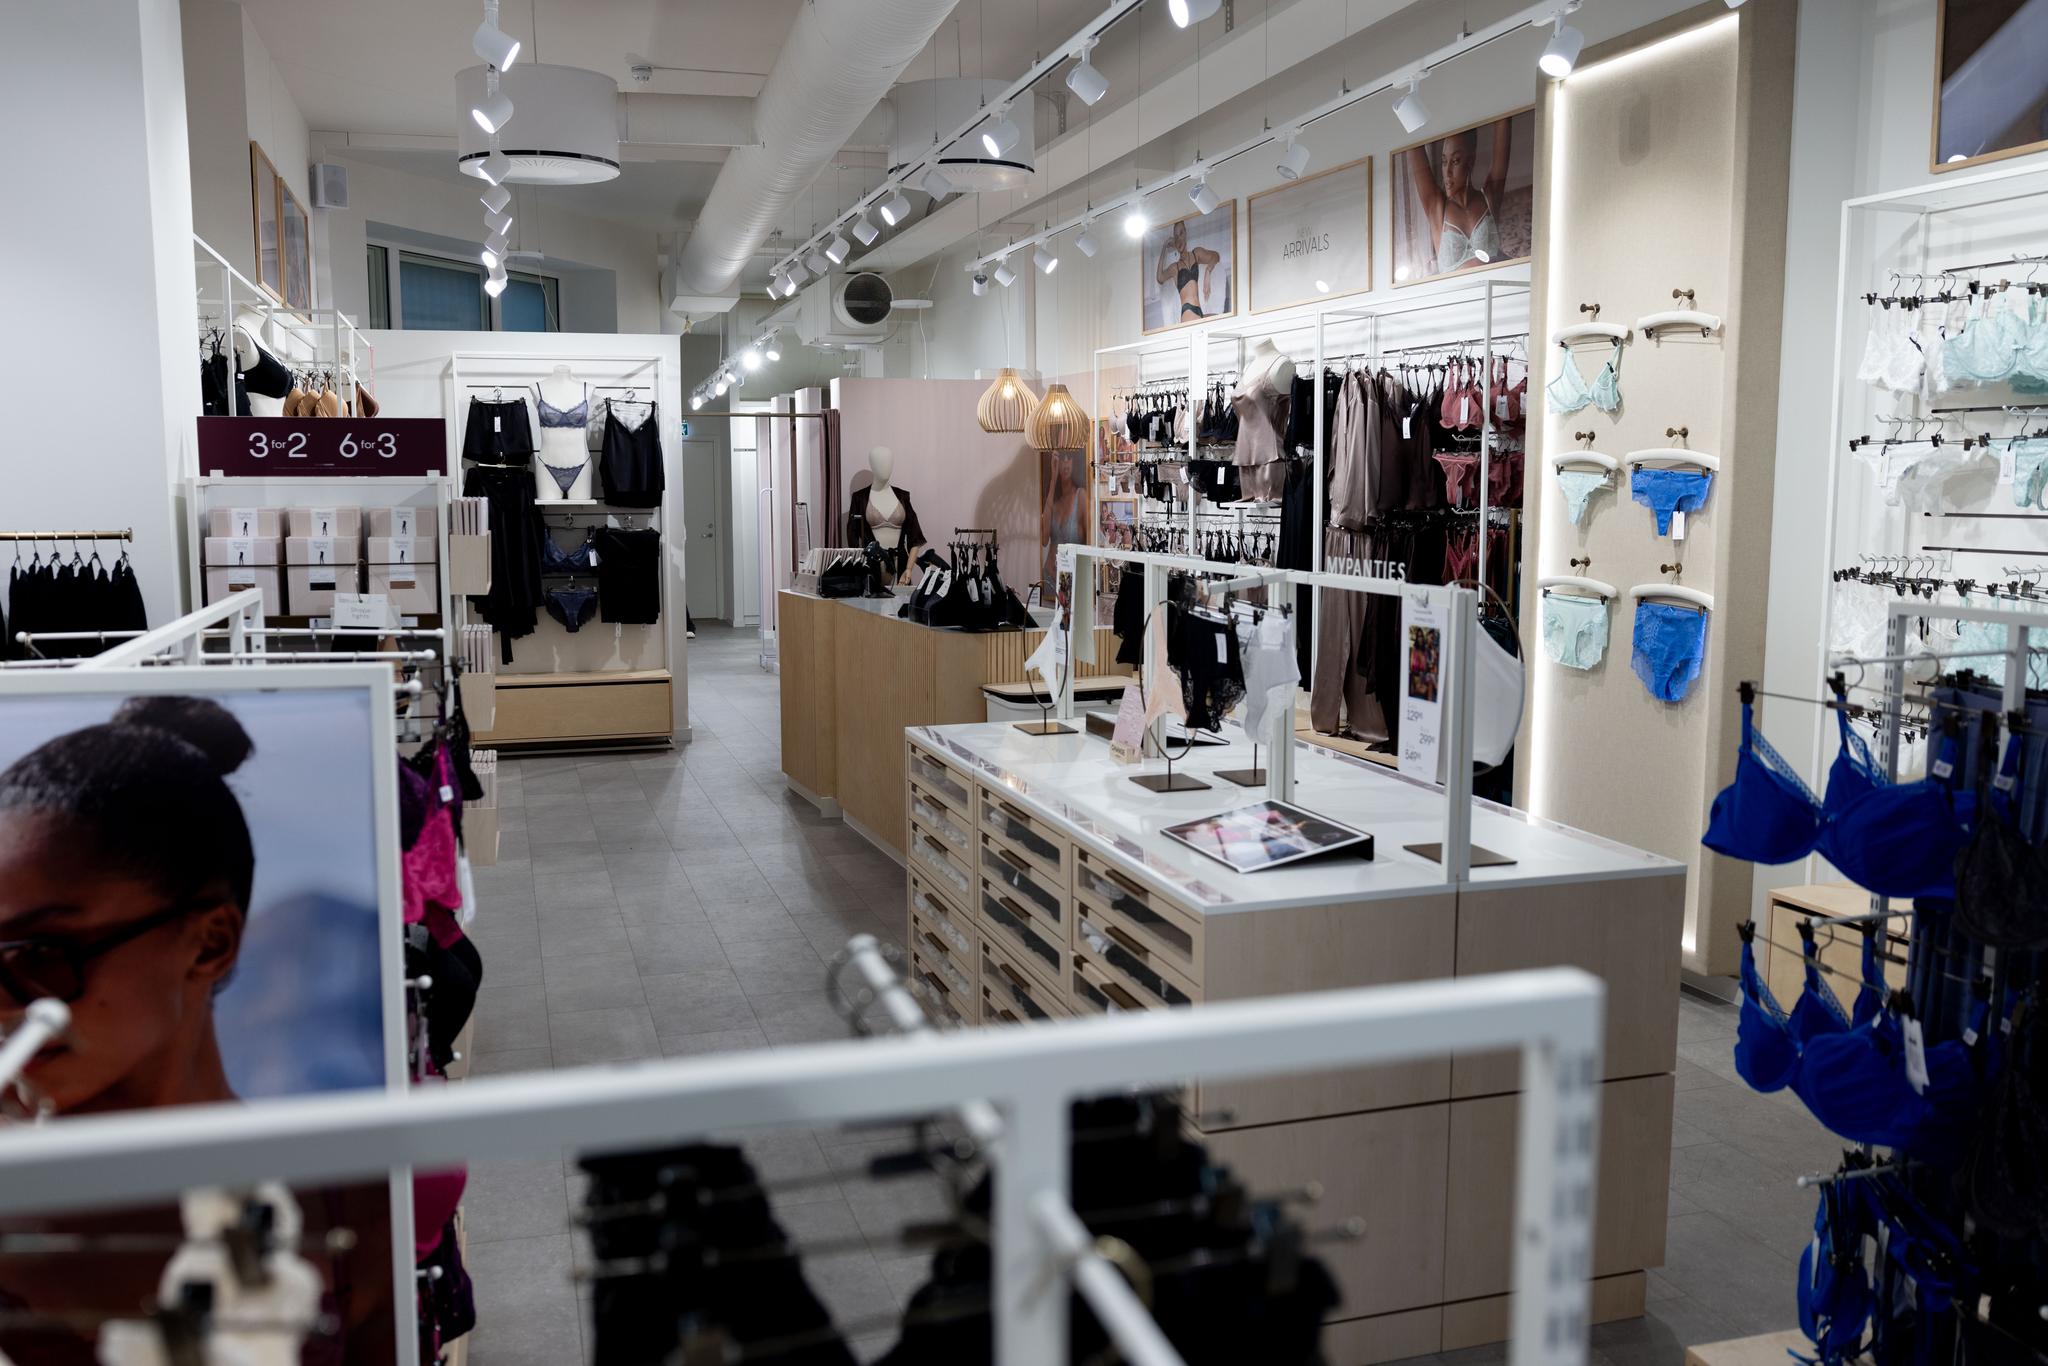 In a lingerie store that changes lingerie, employees must “positively control” their customers